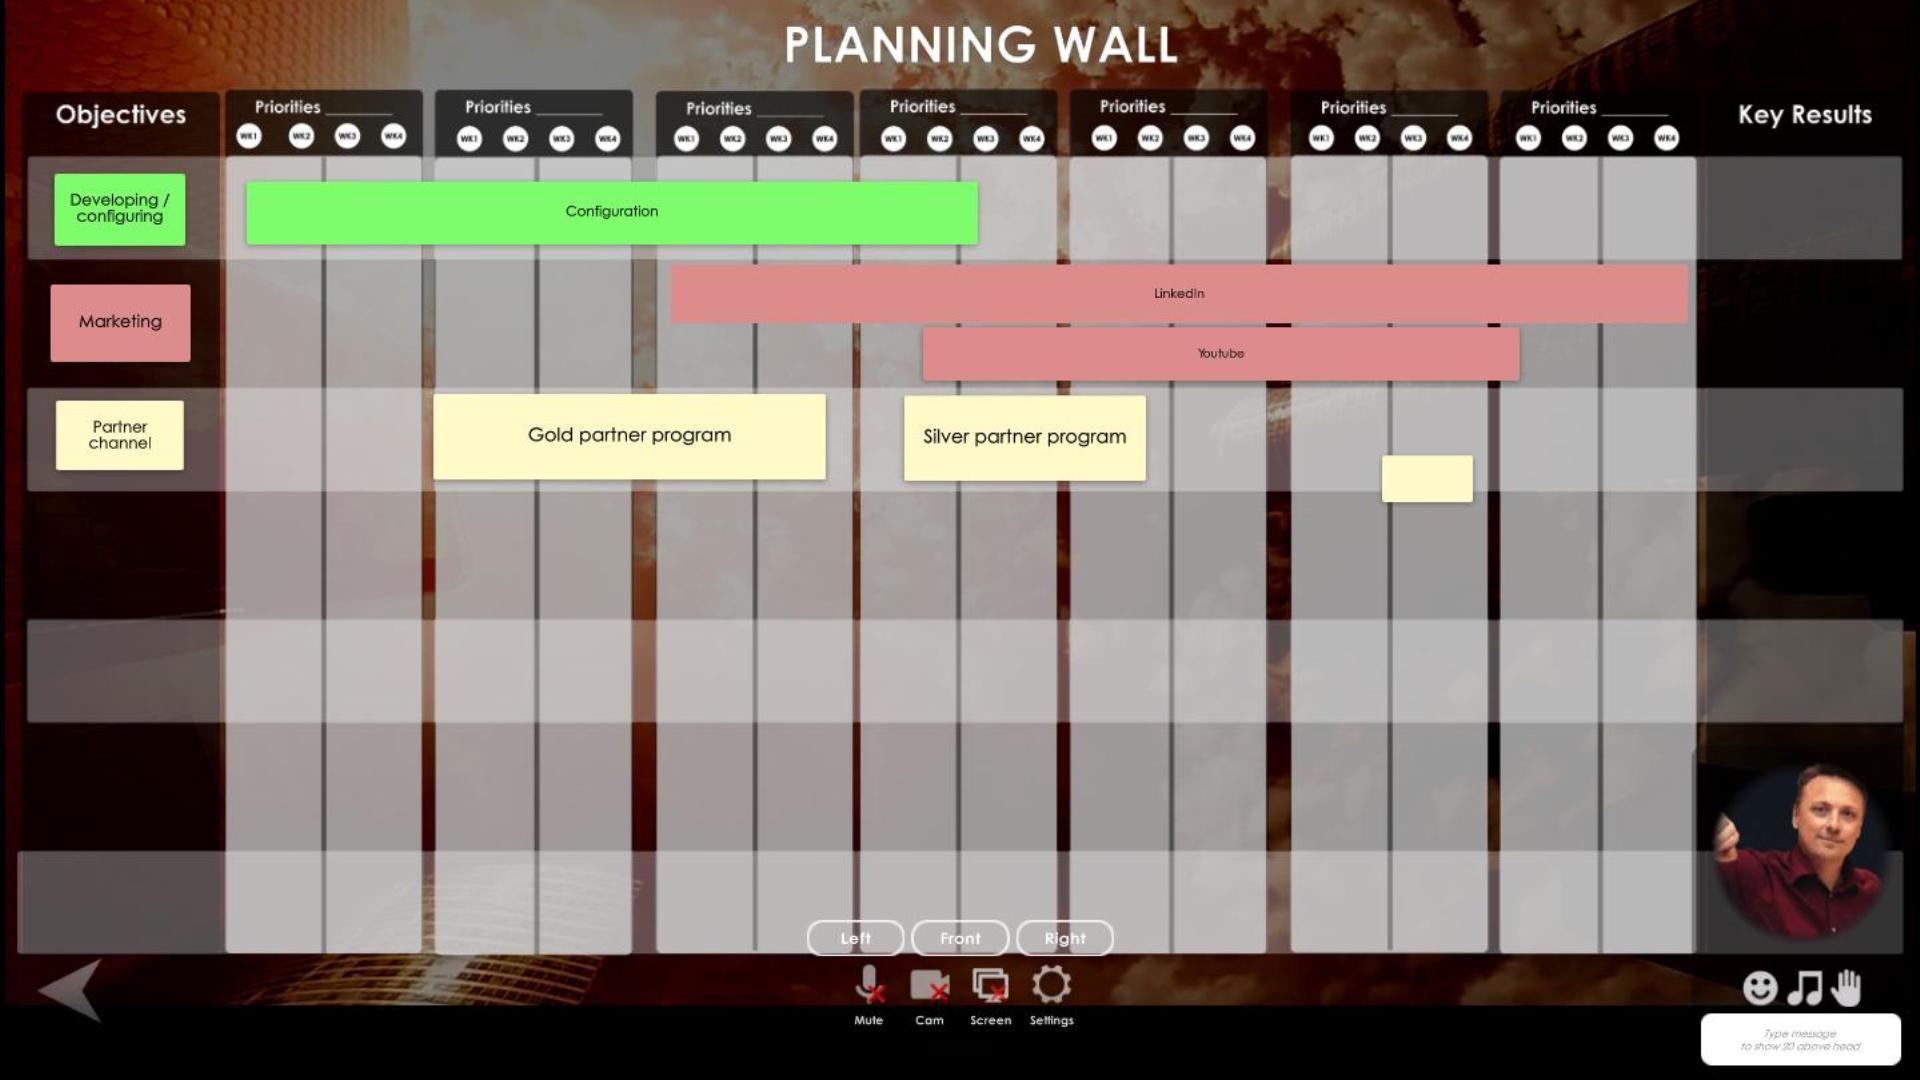 Planning wall